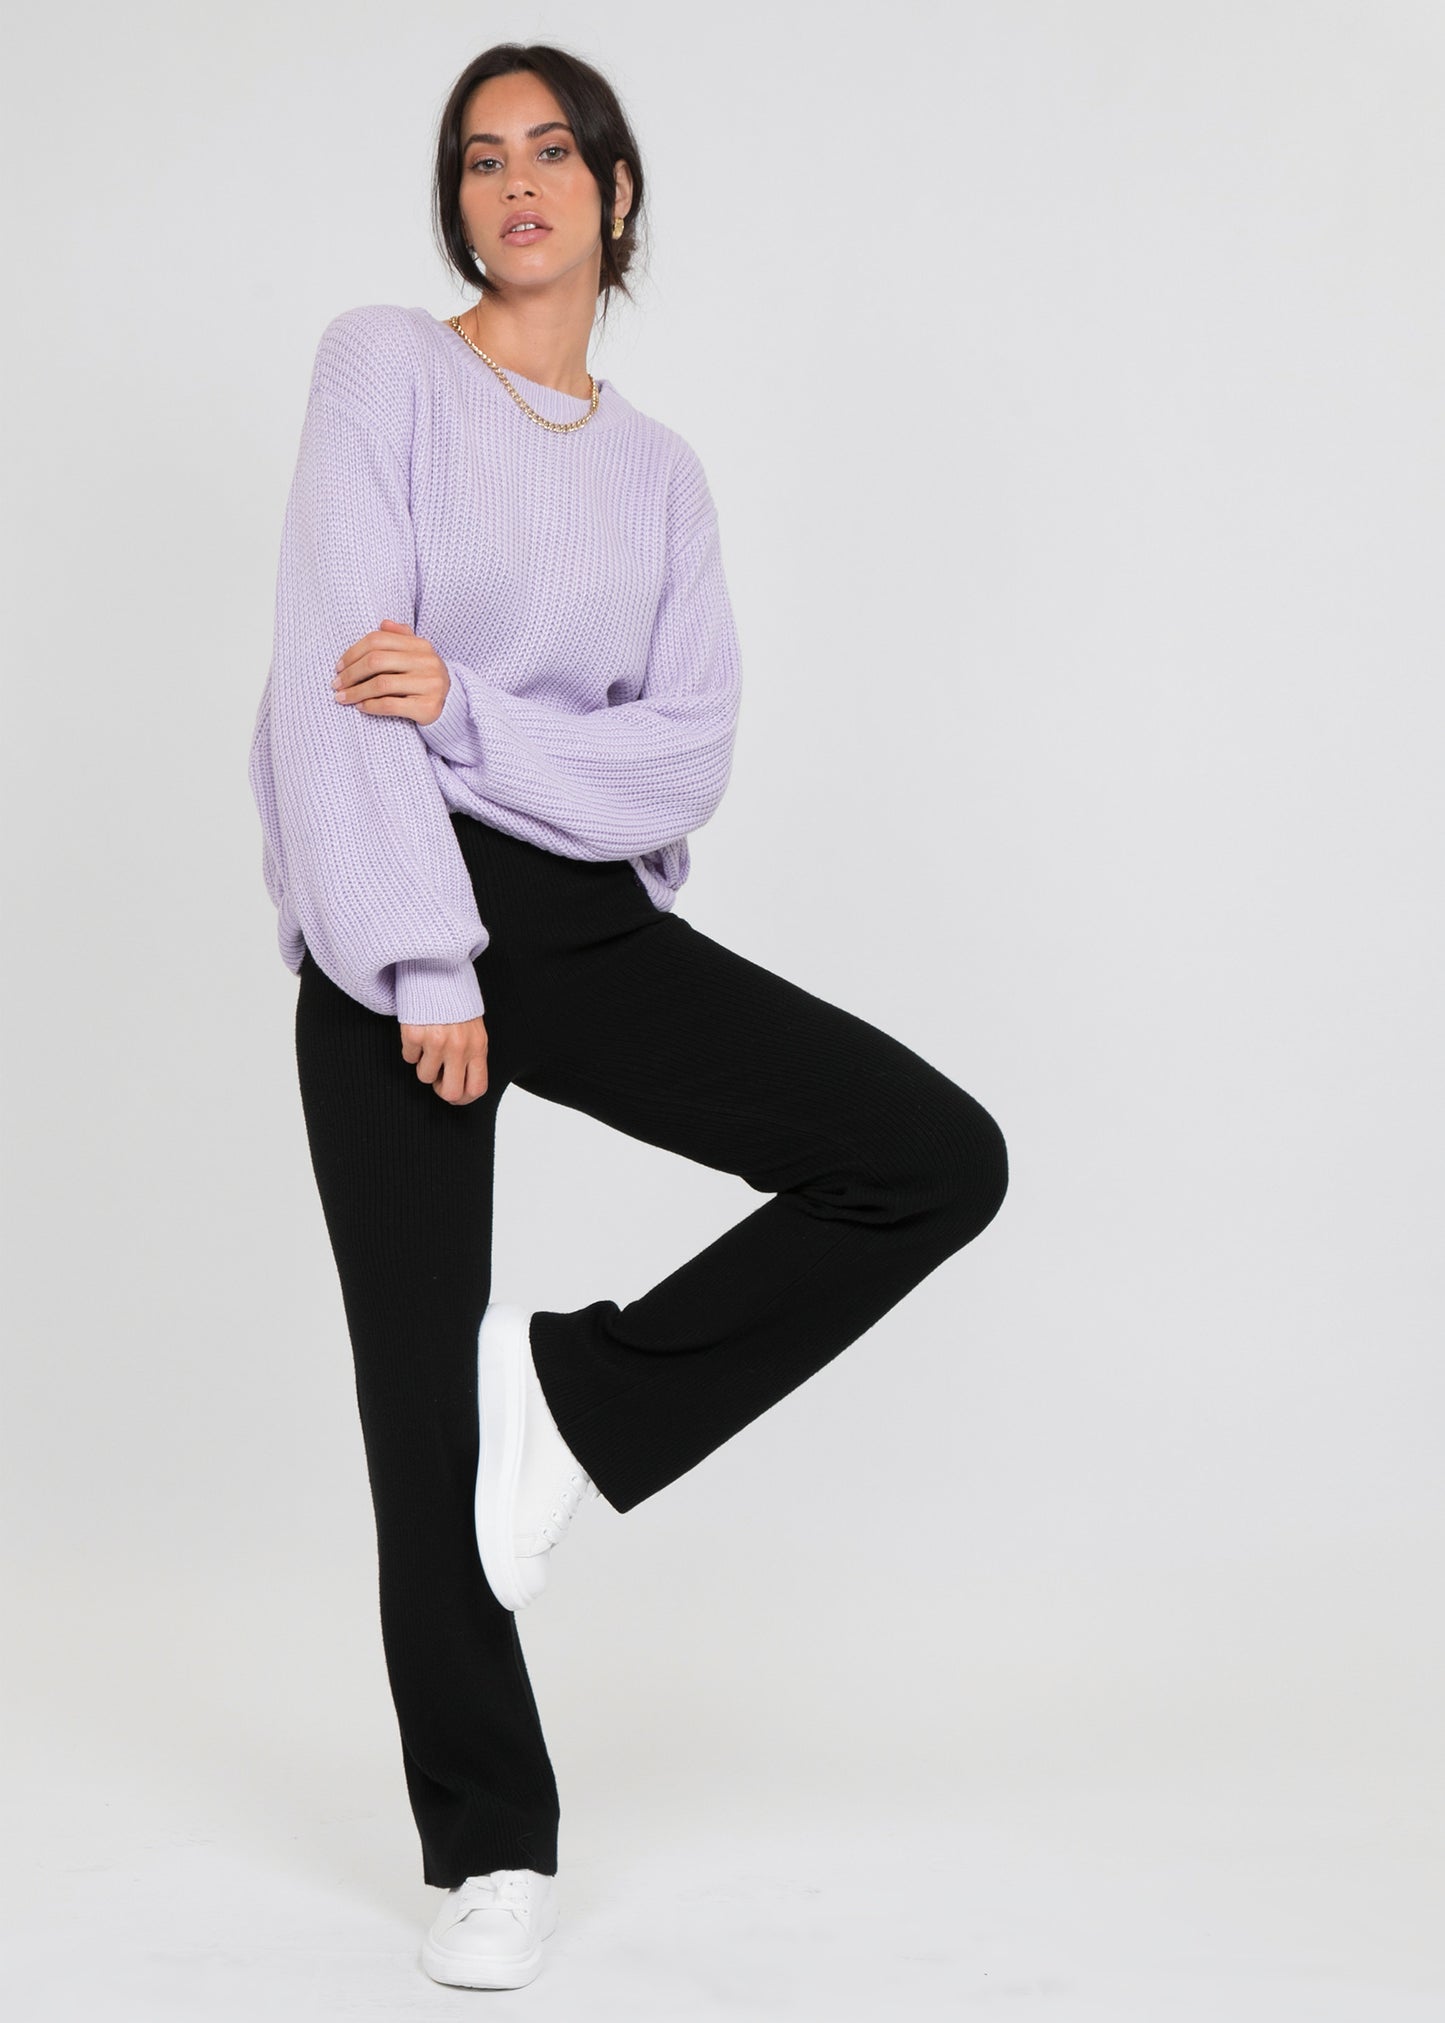 Oversize round neck jumper in lilac